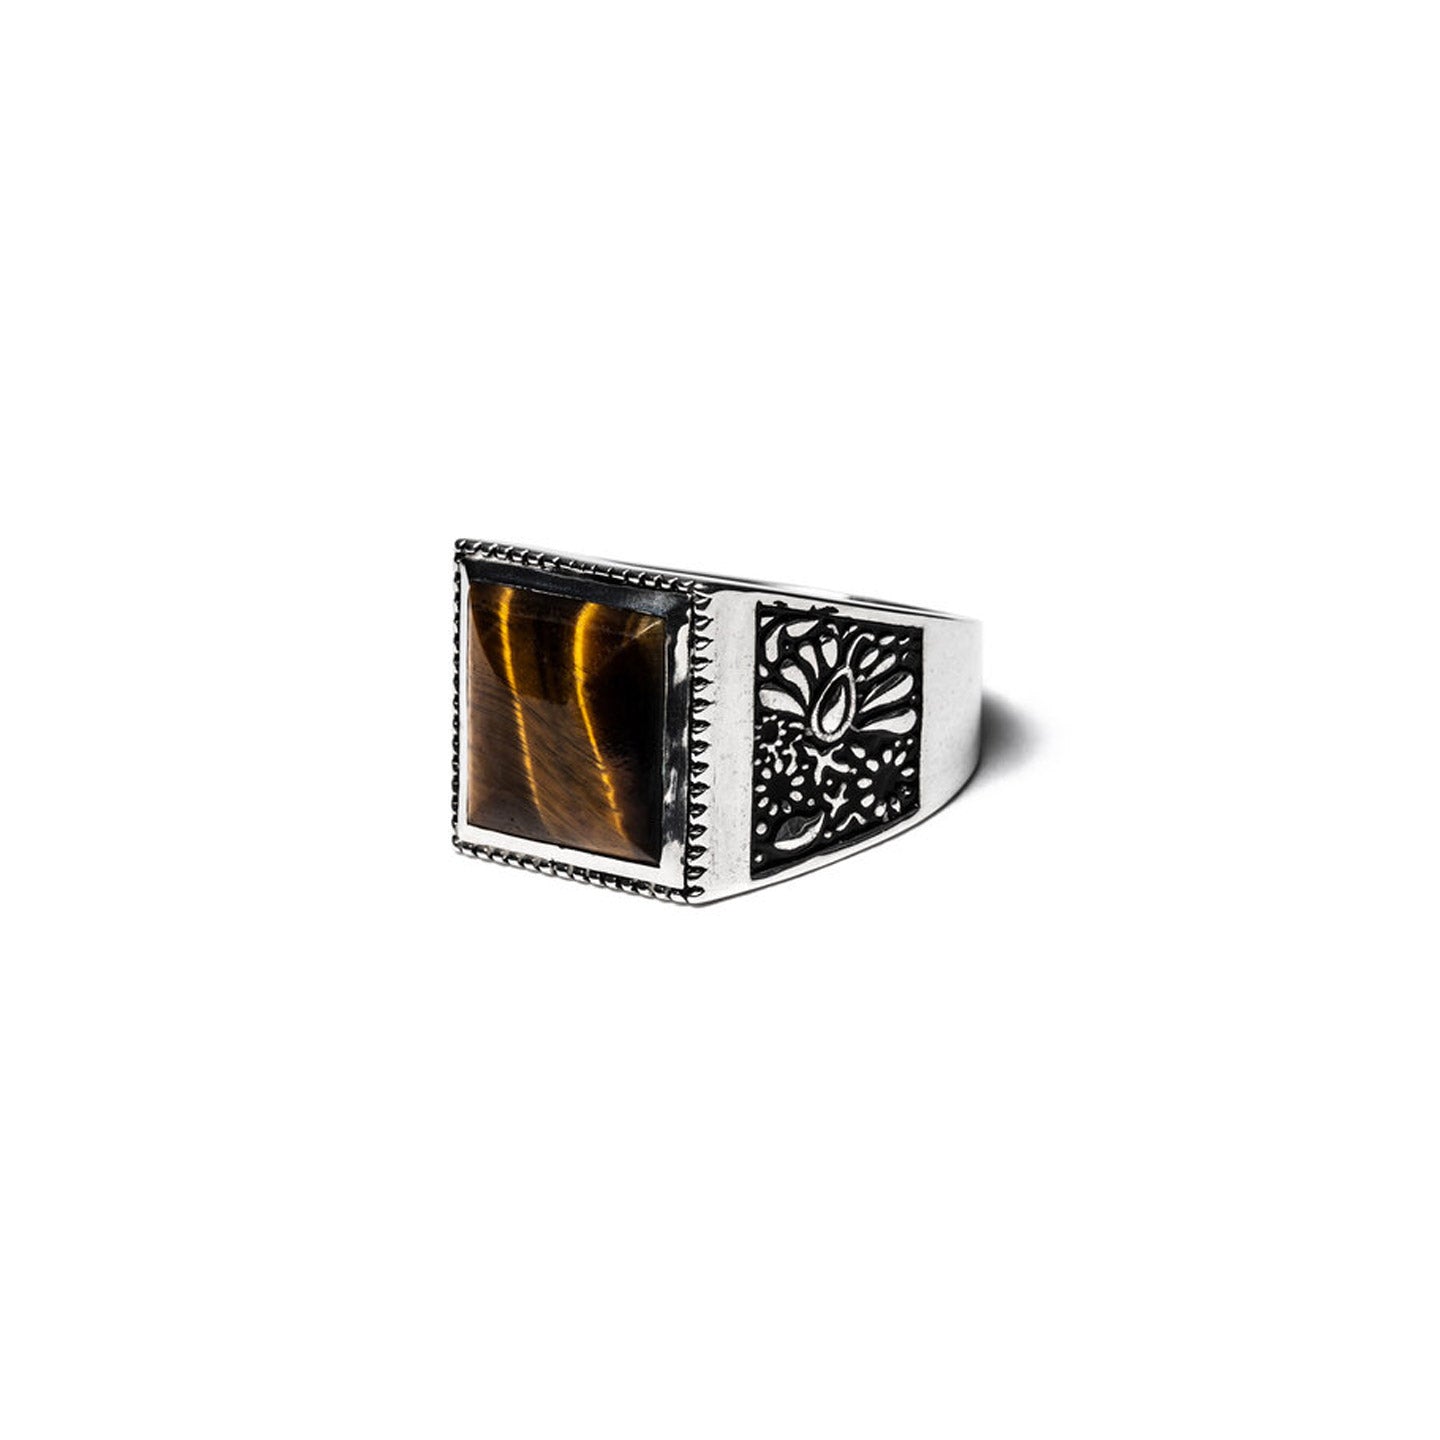 MAPLE BUICK RING SILVER 925 / TIGER EYE